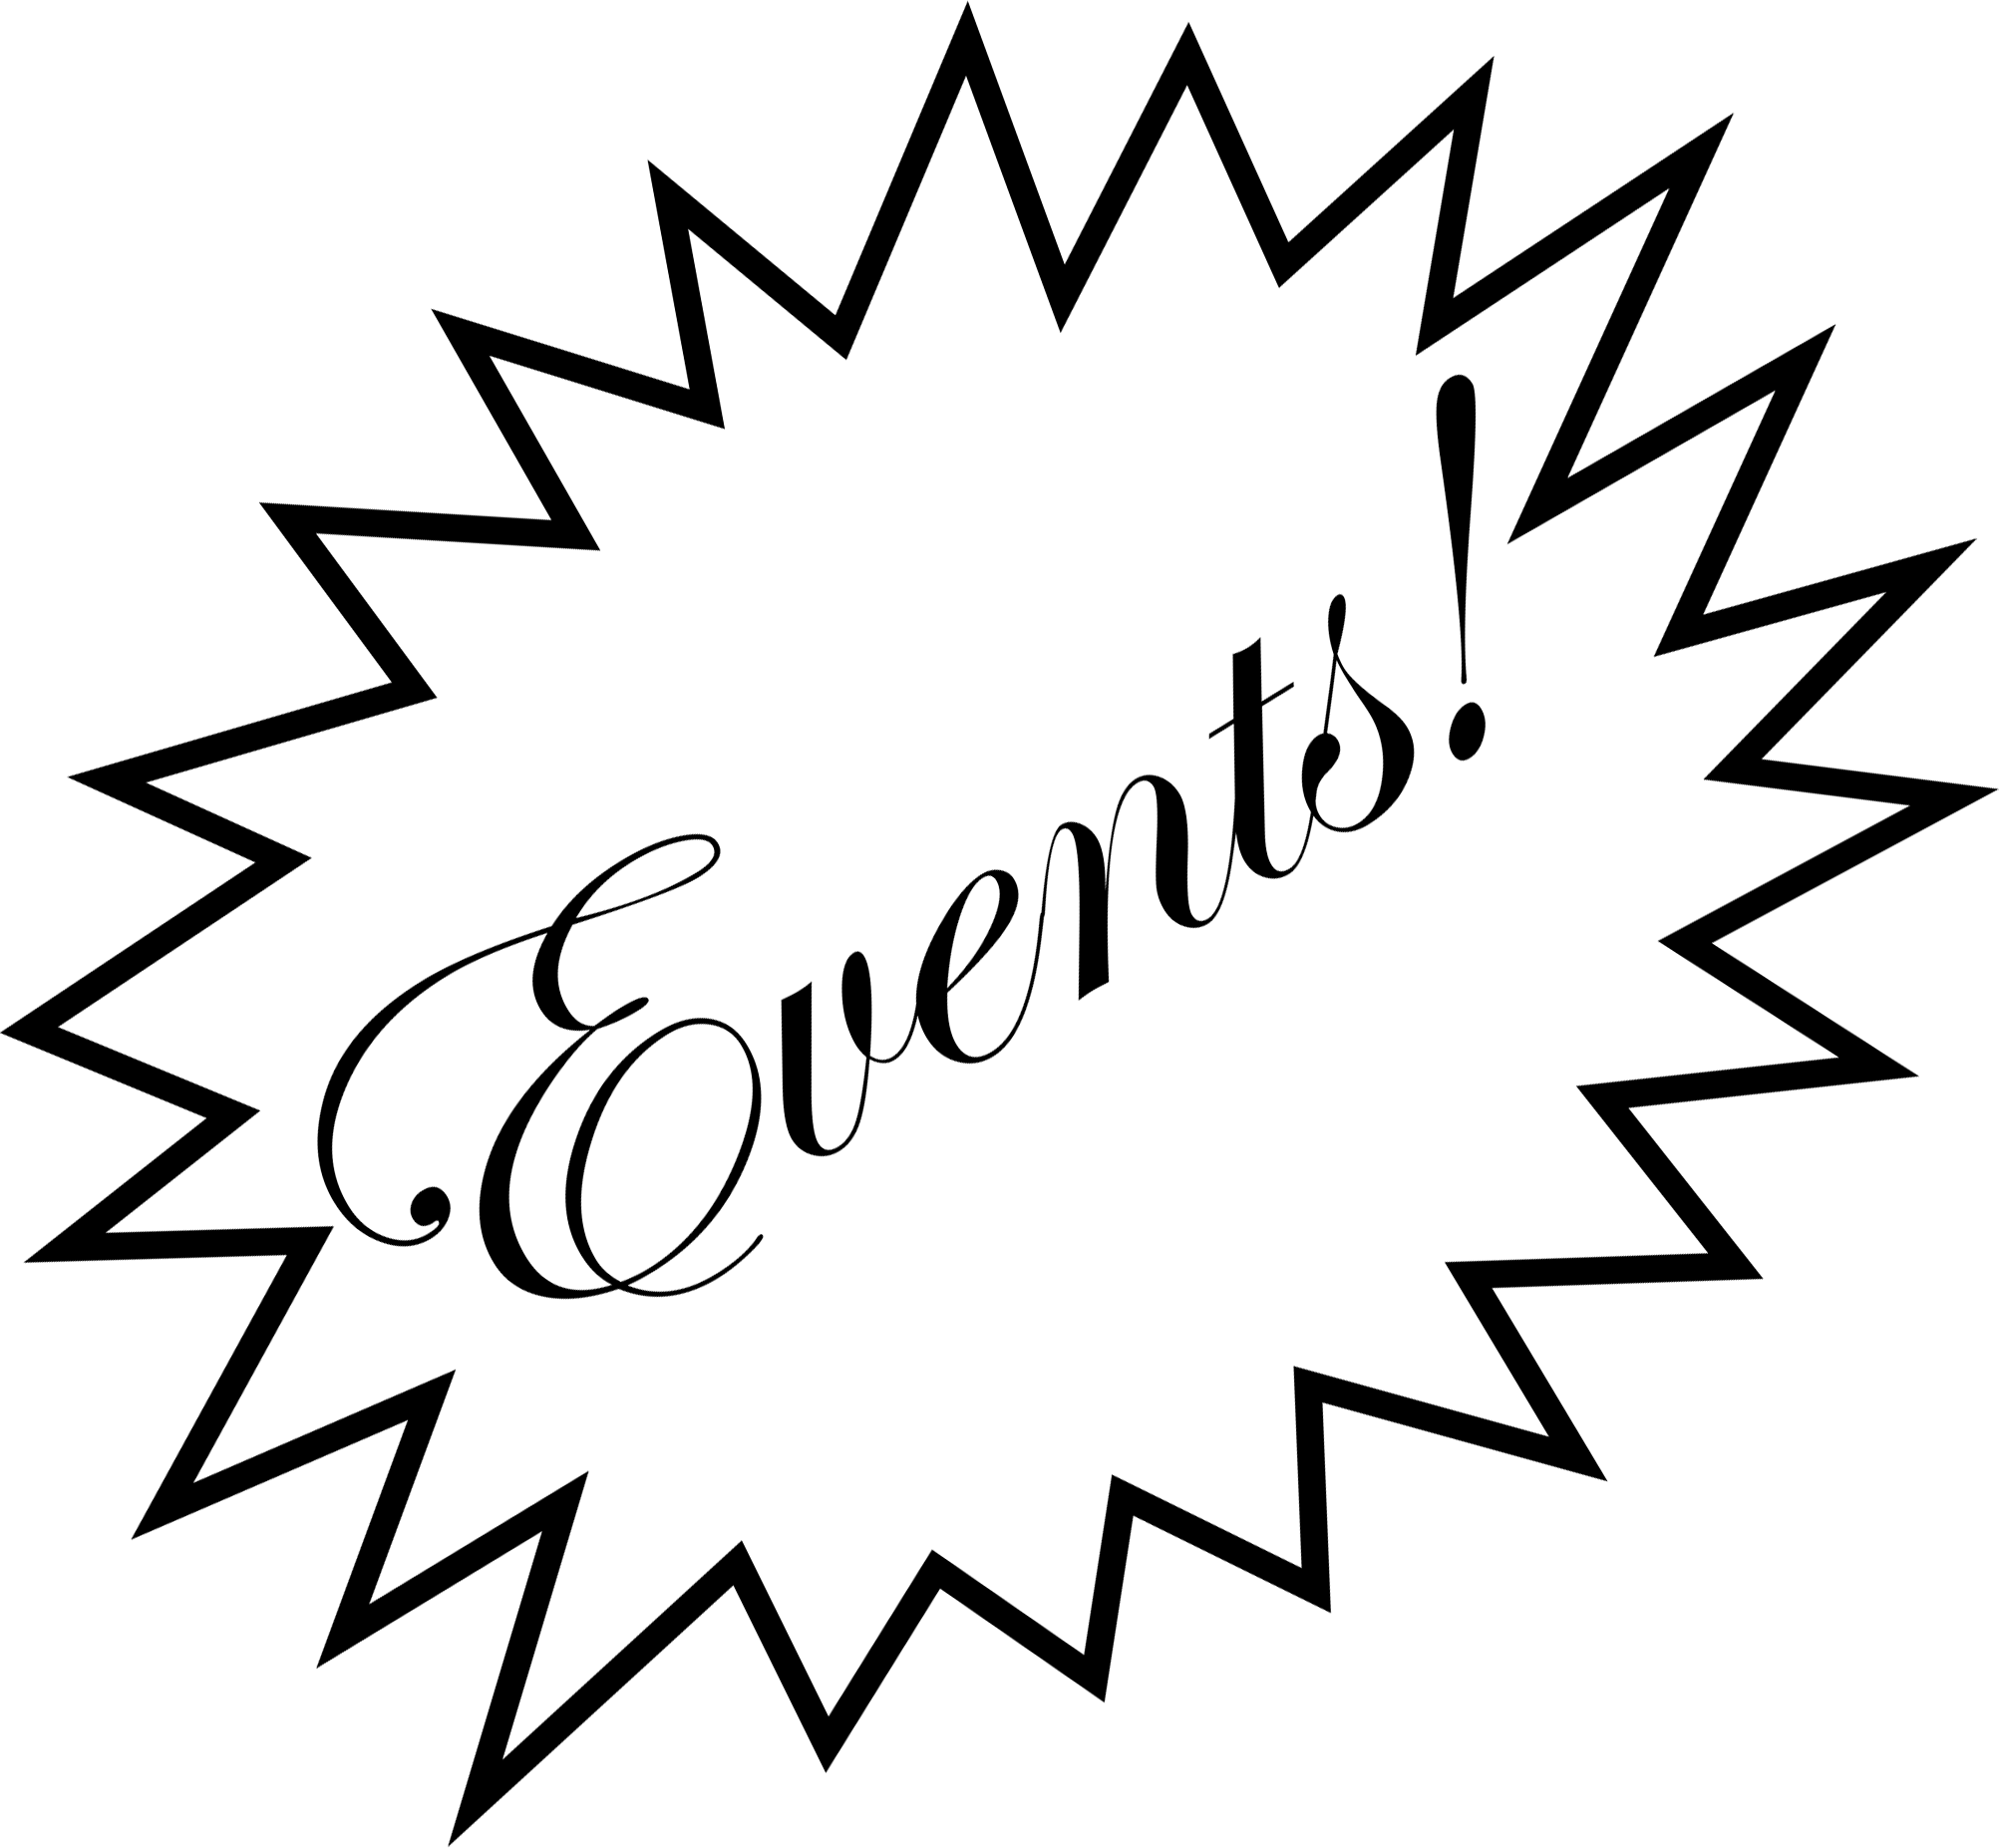 a burst with text that says events